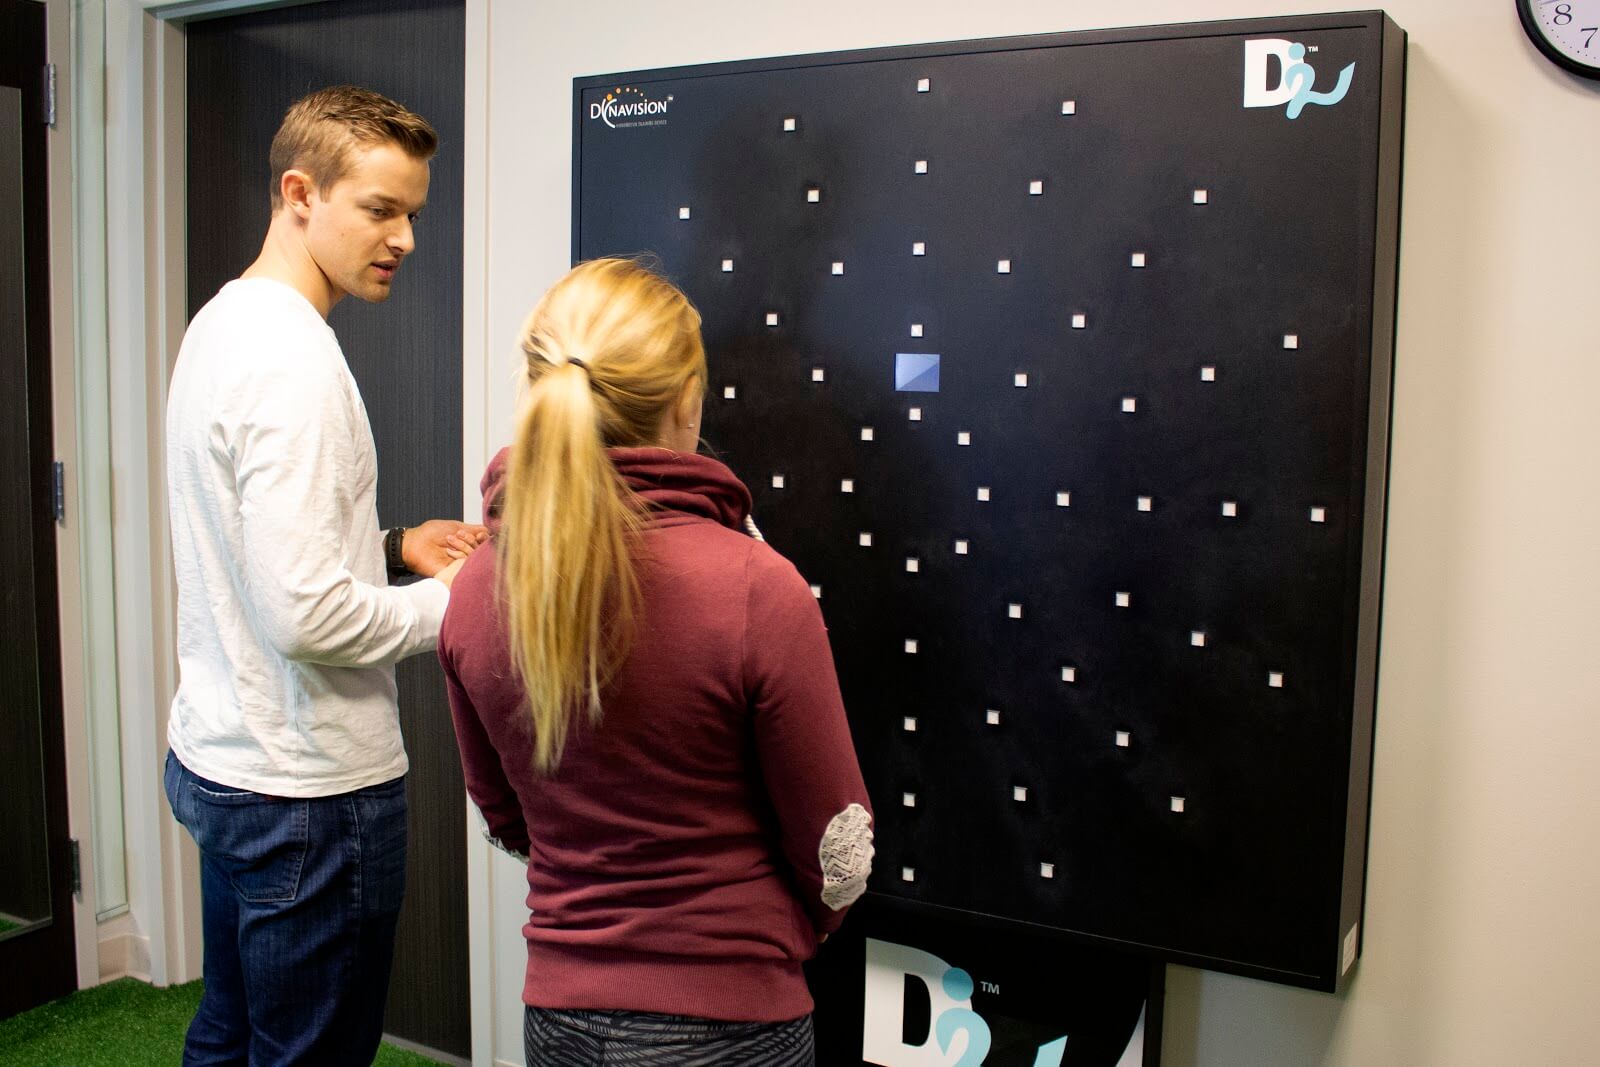 Nate working with a patient at the Dynavision board.